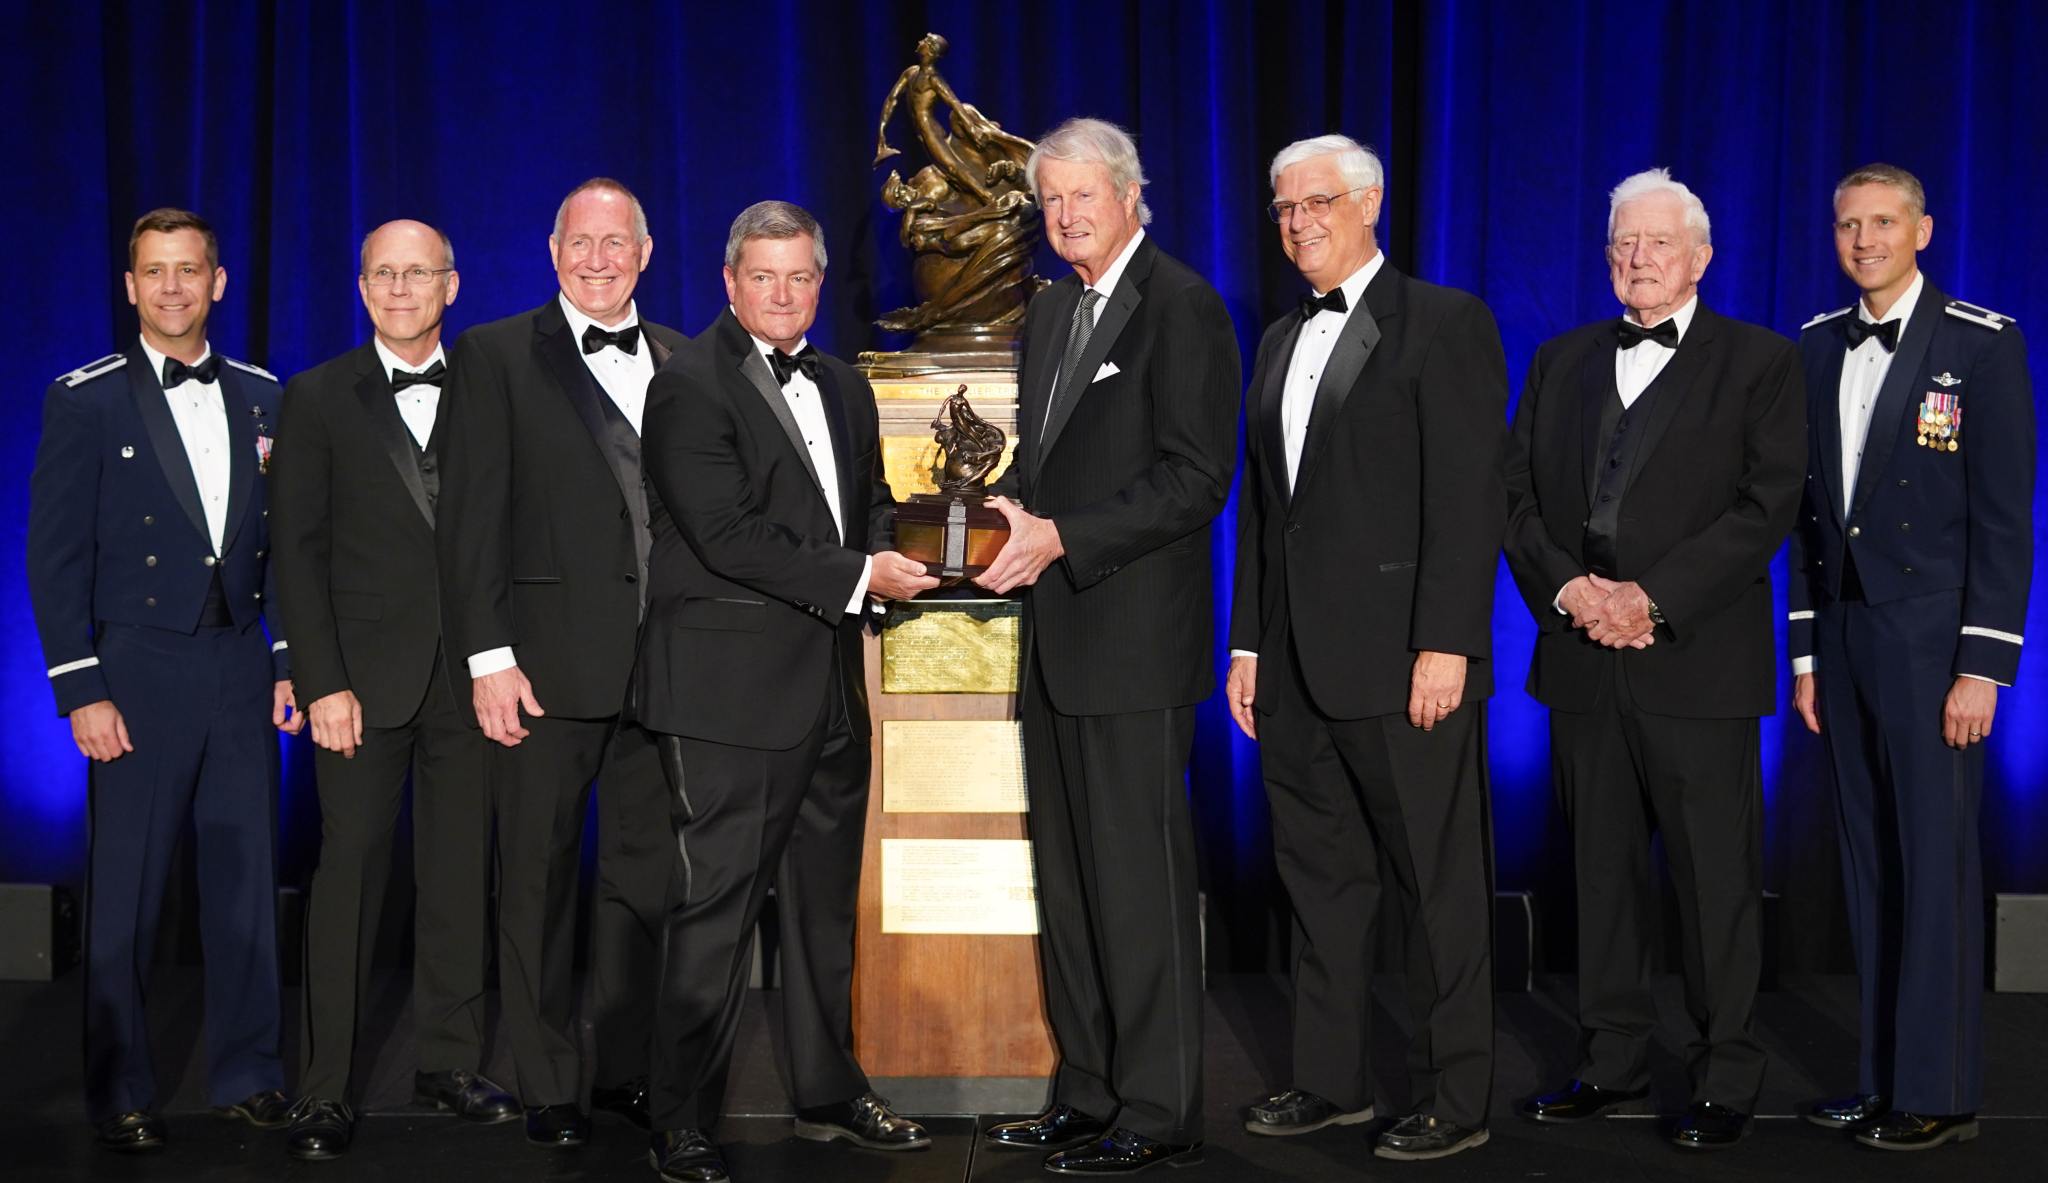 The Automatic Ground Collision Avoidance System Team accepted the Collier Trophy on June 13, 2019.